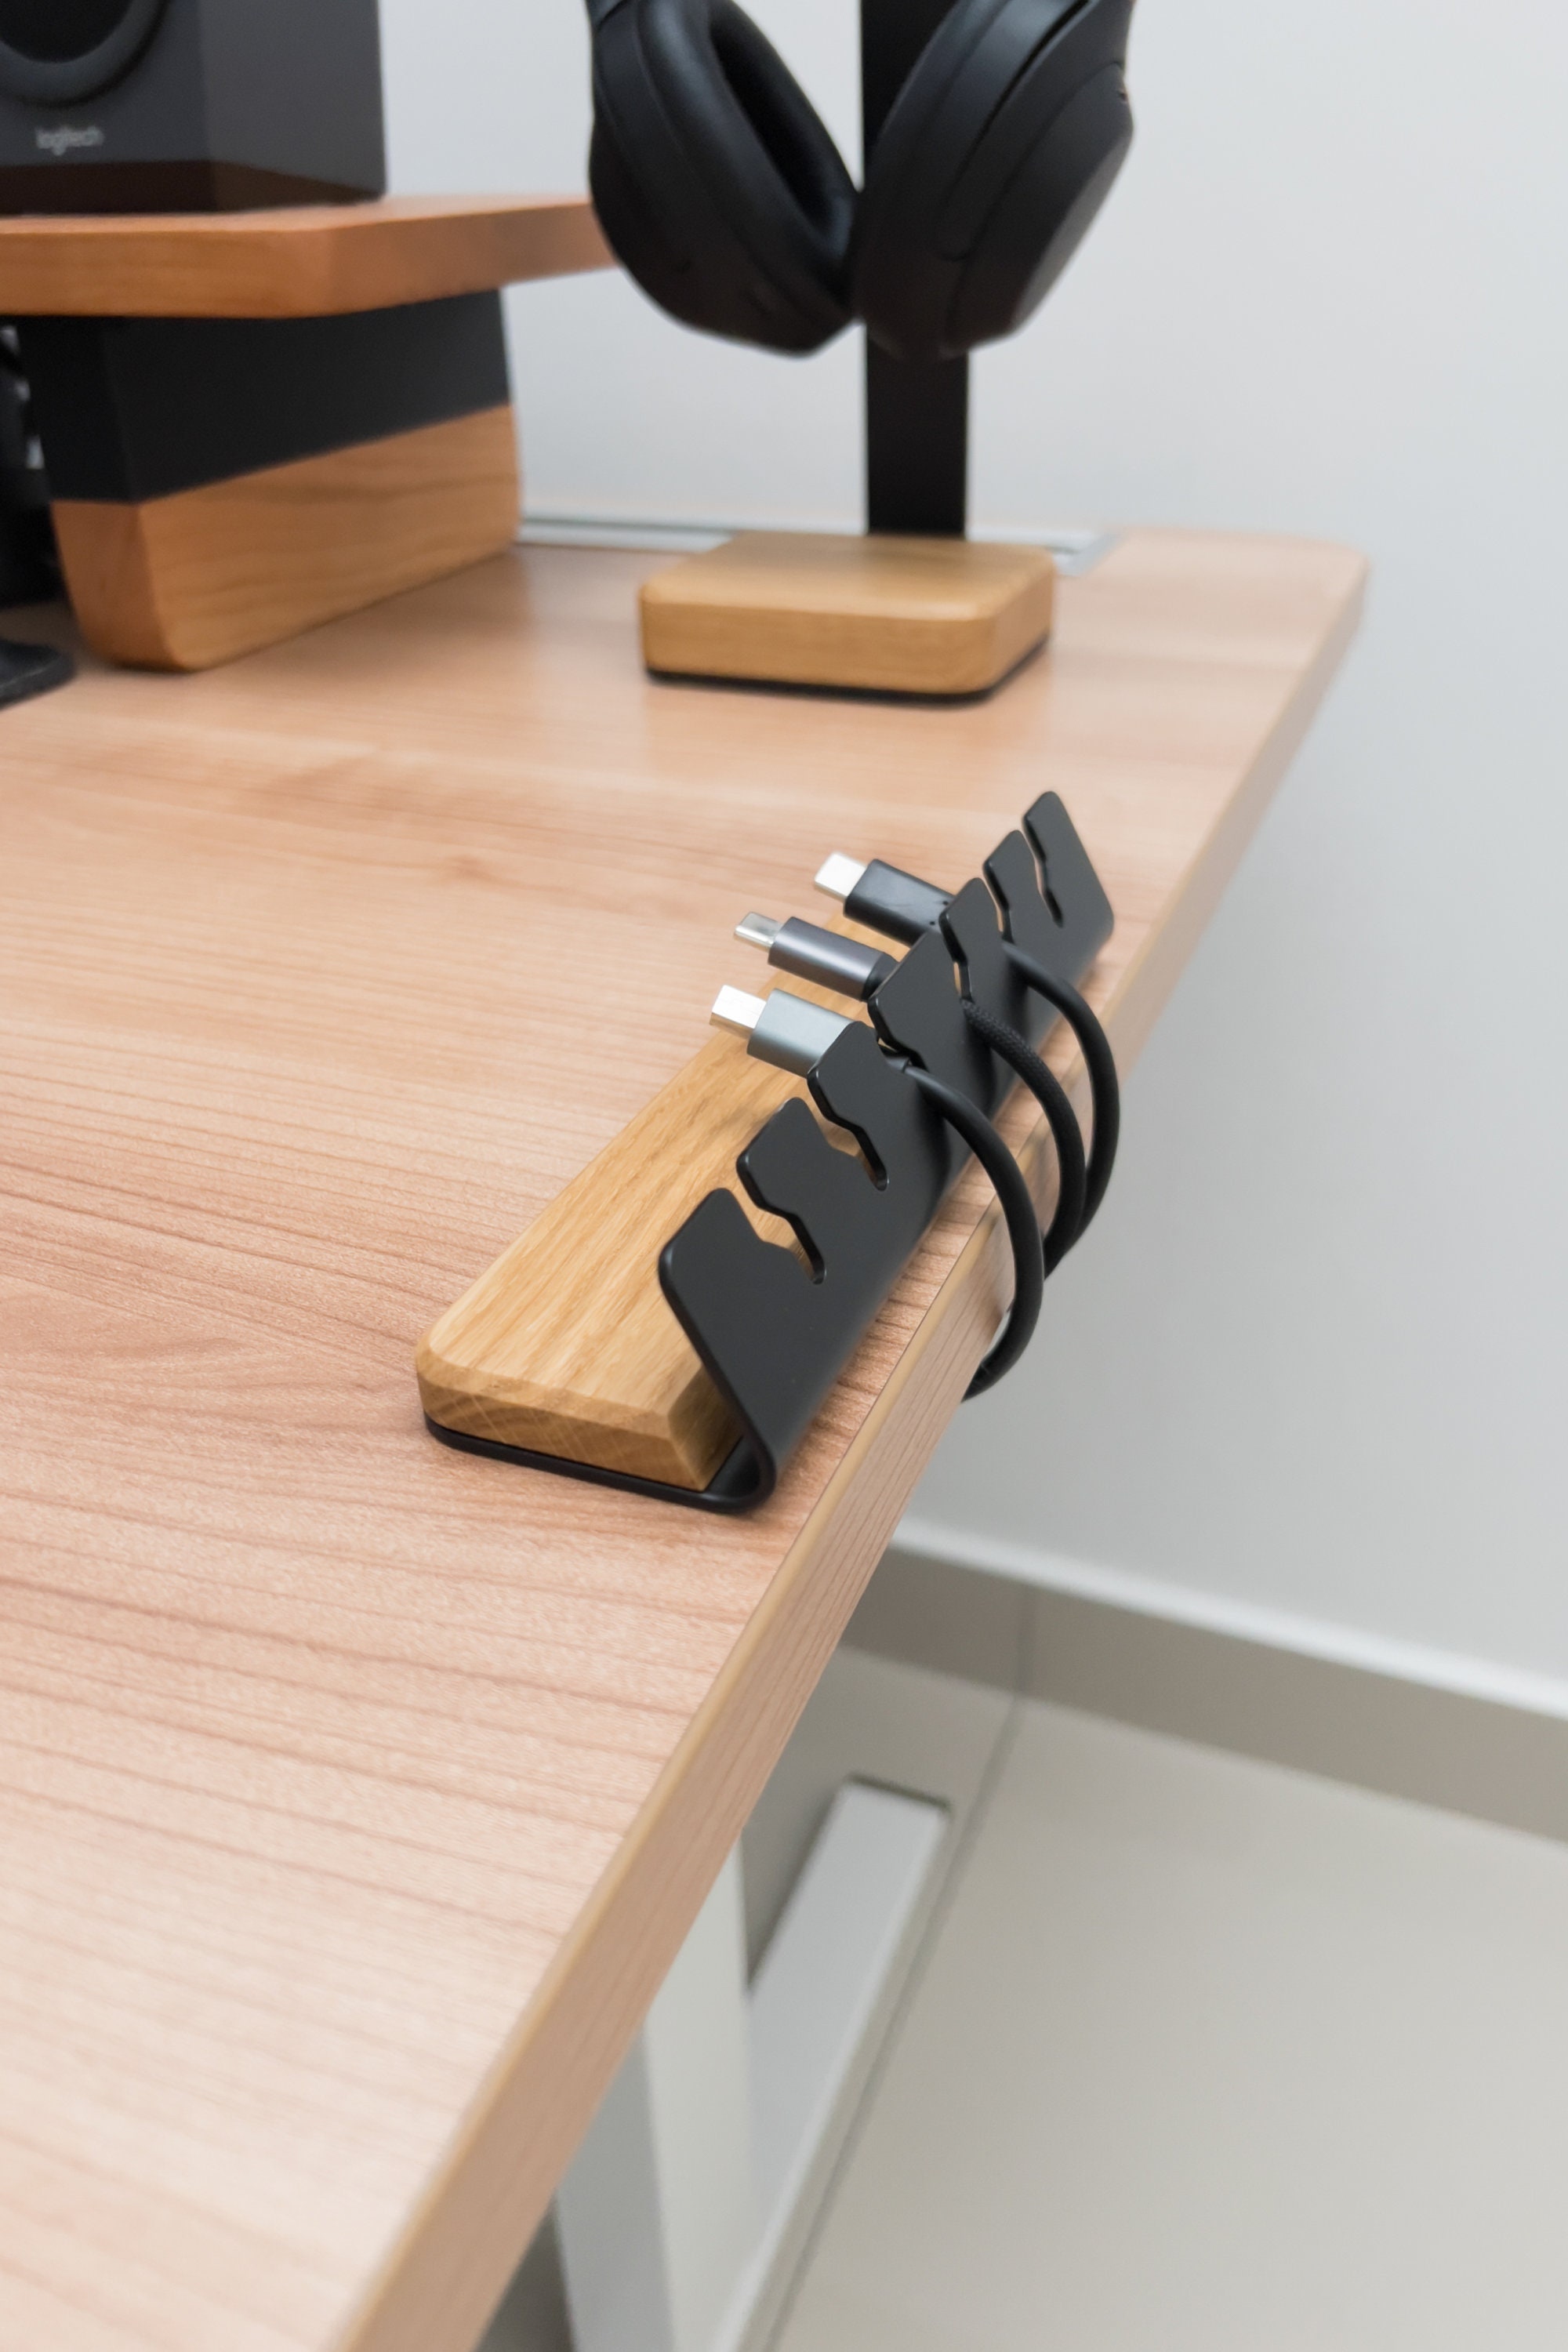 Wood Cable Organizer Box Minimalist, Cable Management Box Wood, Desk Cord  Organizer, Steel and Wooden Cord Organizer, Desk Cable Holder 